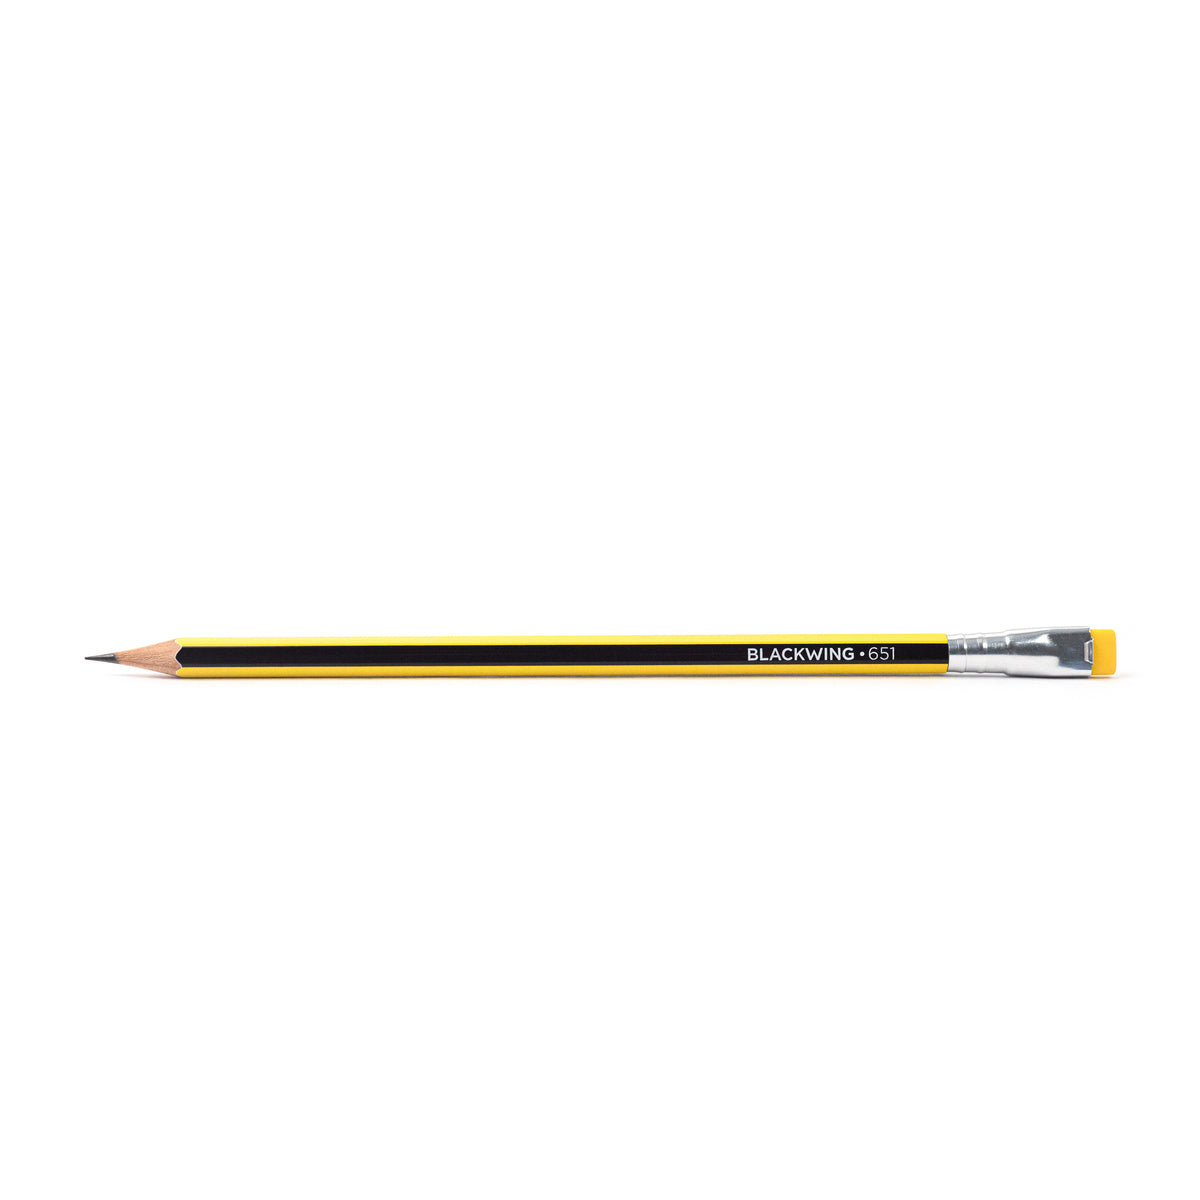 A Blackwing Volume 651 (Set of 12) pencil on a white background.